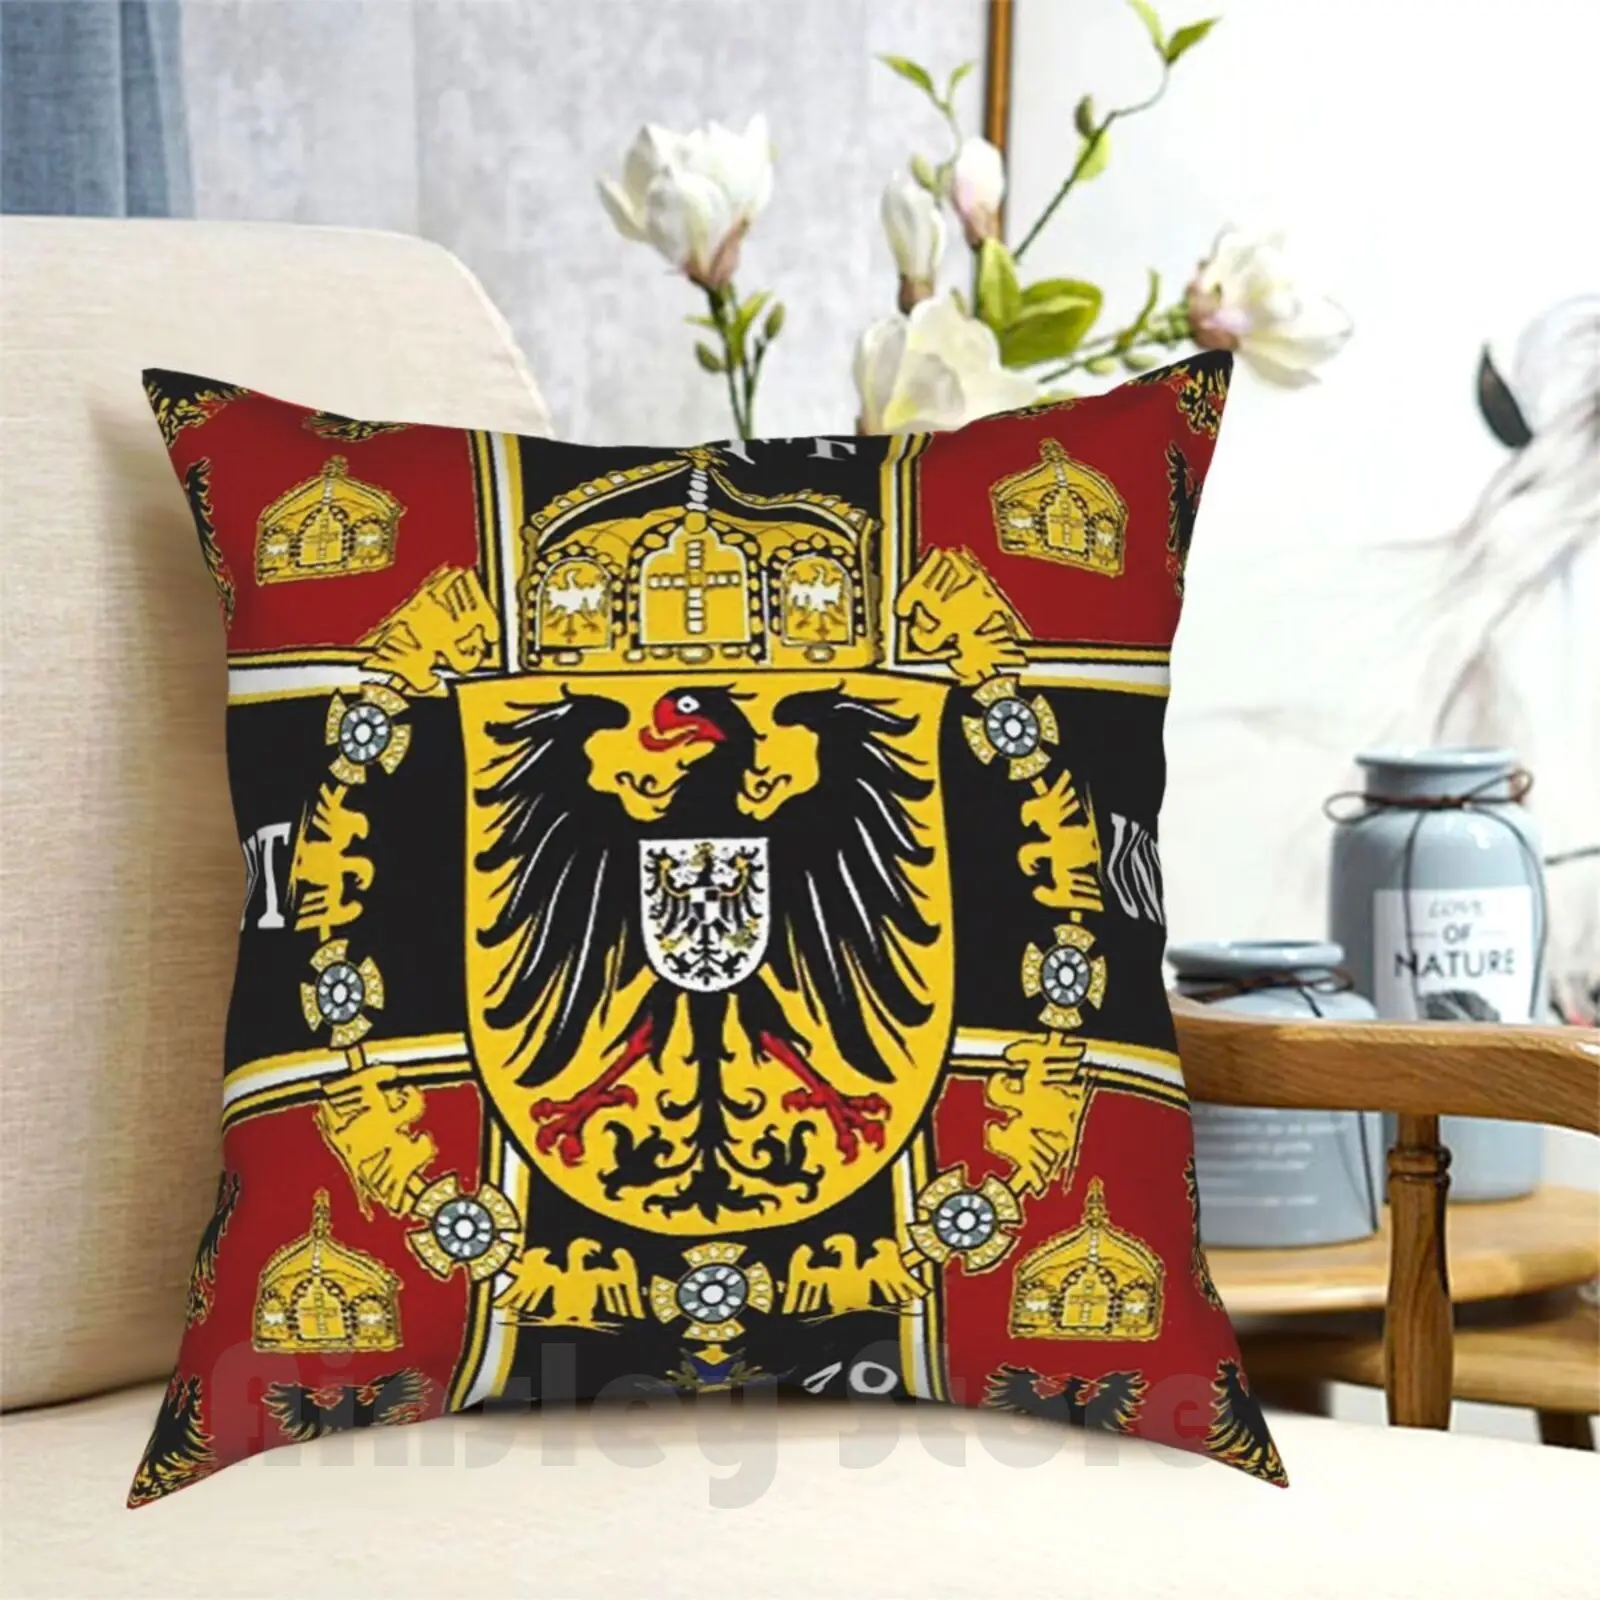 

Prussian Battle Flag Of 1870 On Red Pillow Case Printed Home Soft Throw Pillow German Prussia Vintage Germany Prussian